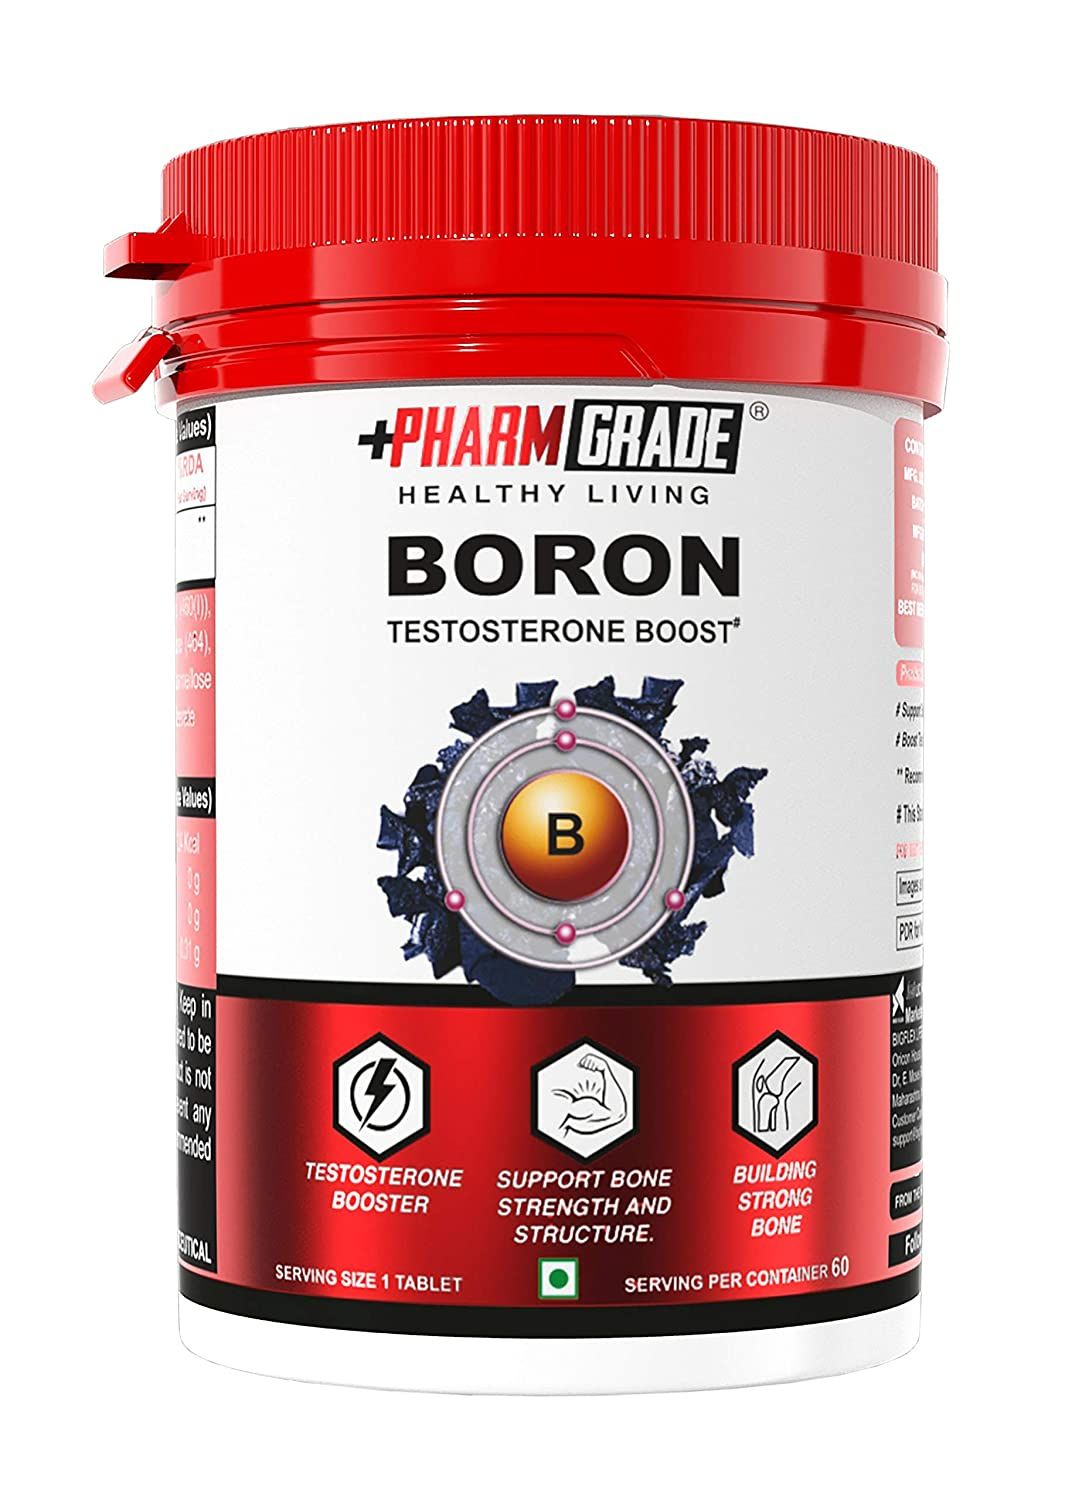 Pharmgrade Healthy Living Boron Testosterone Booster Supplement Image